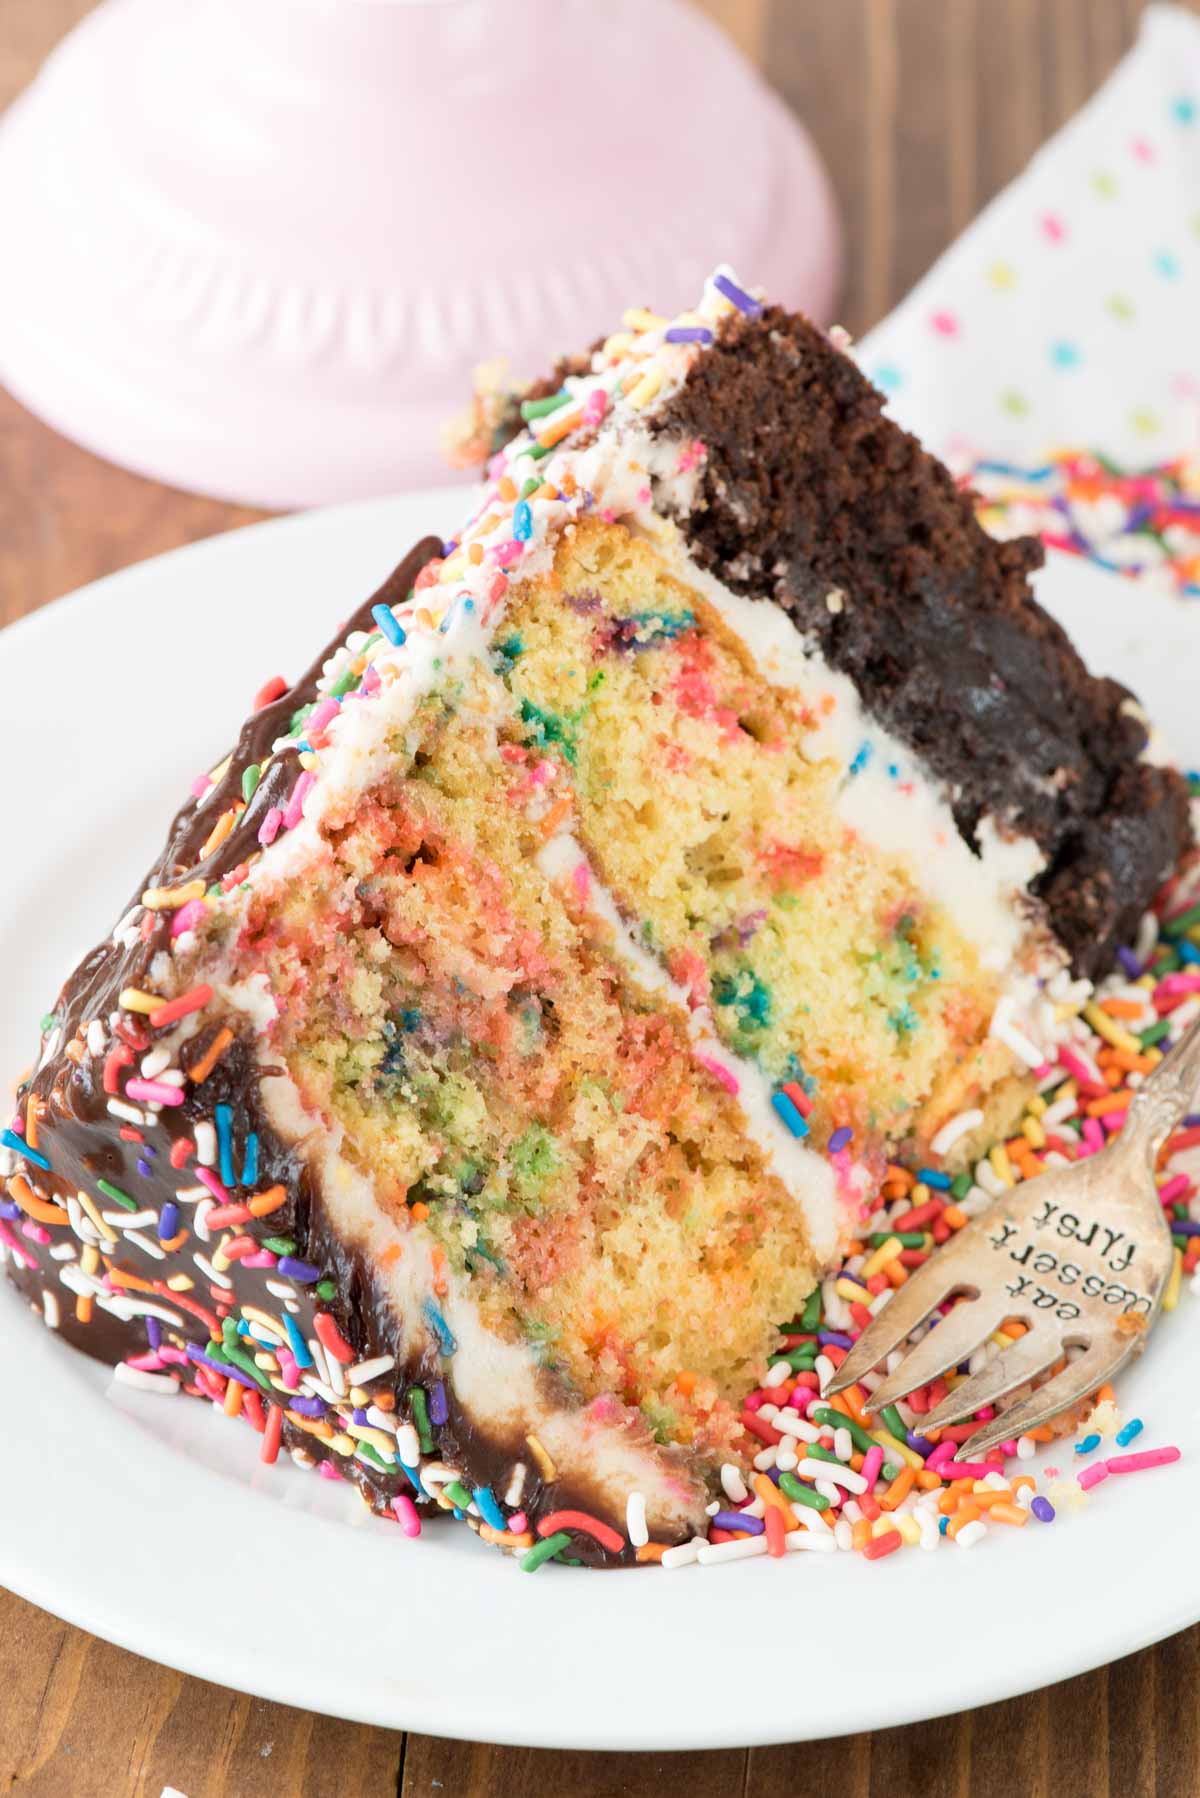 Funfetti Brownie Layer Cake - this cake is easier than it looks! There's a layer of brownie and two layers of confetti cake, filled with a cream cheese frosting and topped with a hot fudge chocolate drizzle!